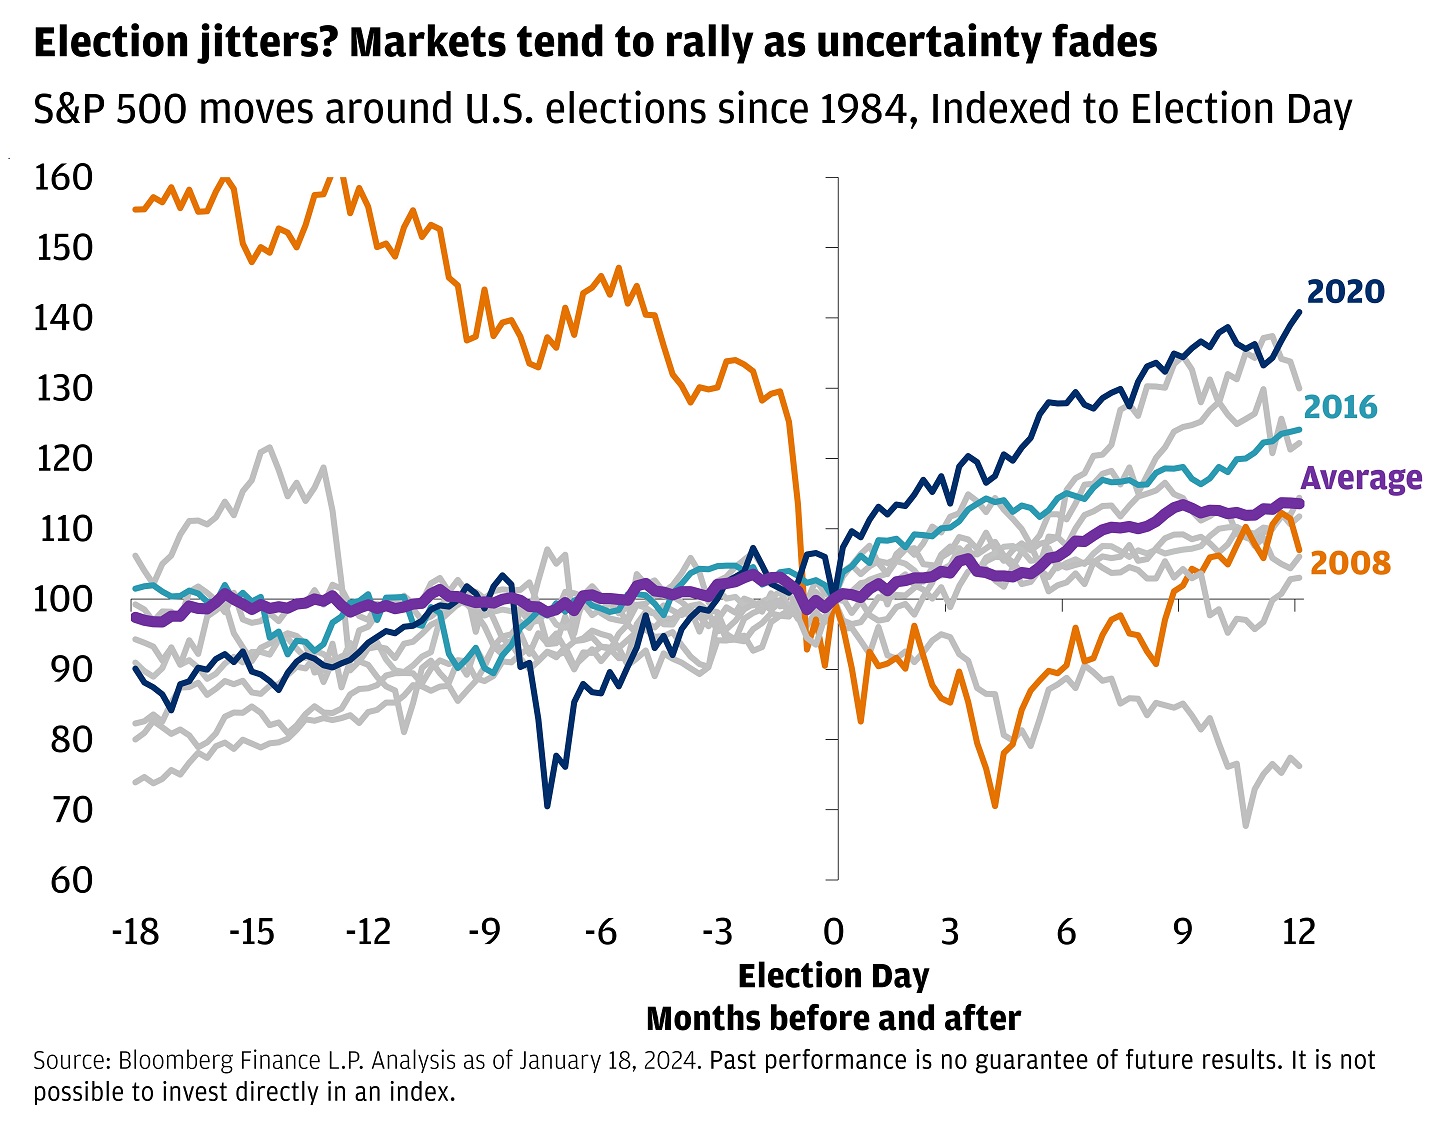 The line graph shows the S&P 500 performance around U.S. elections since 1980, Indexed to Election Day.